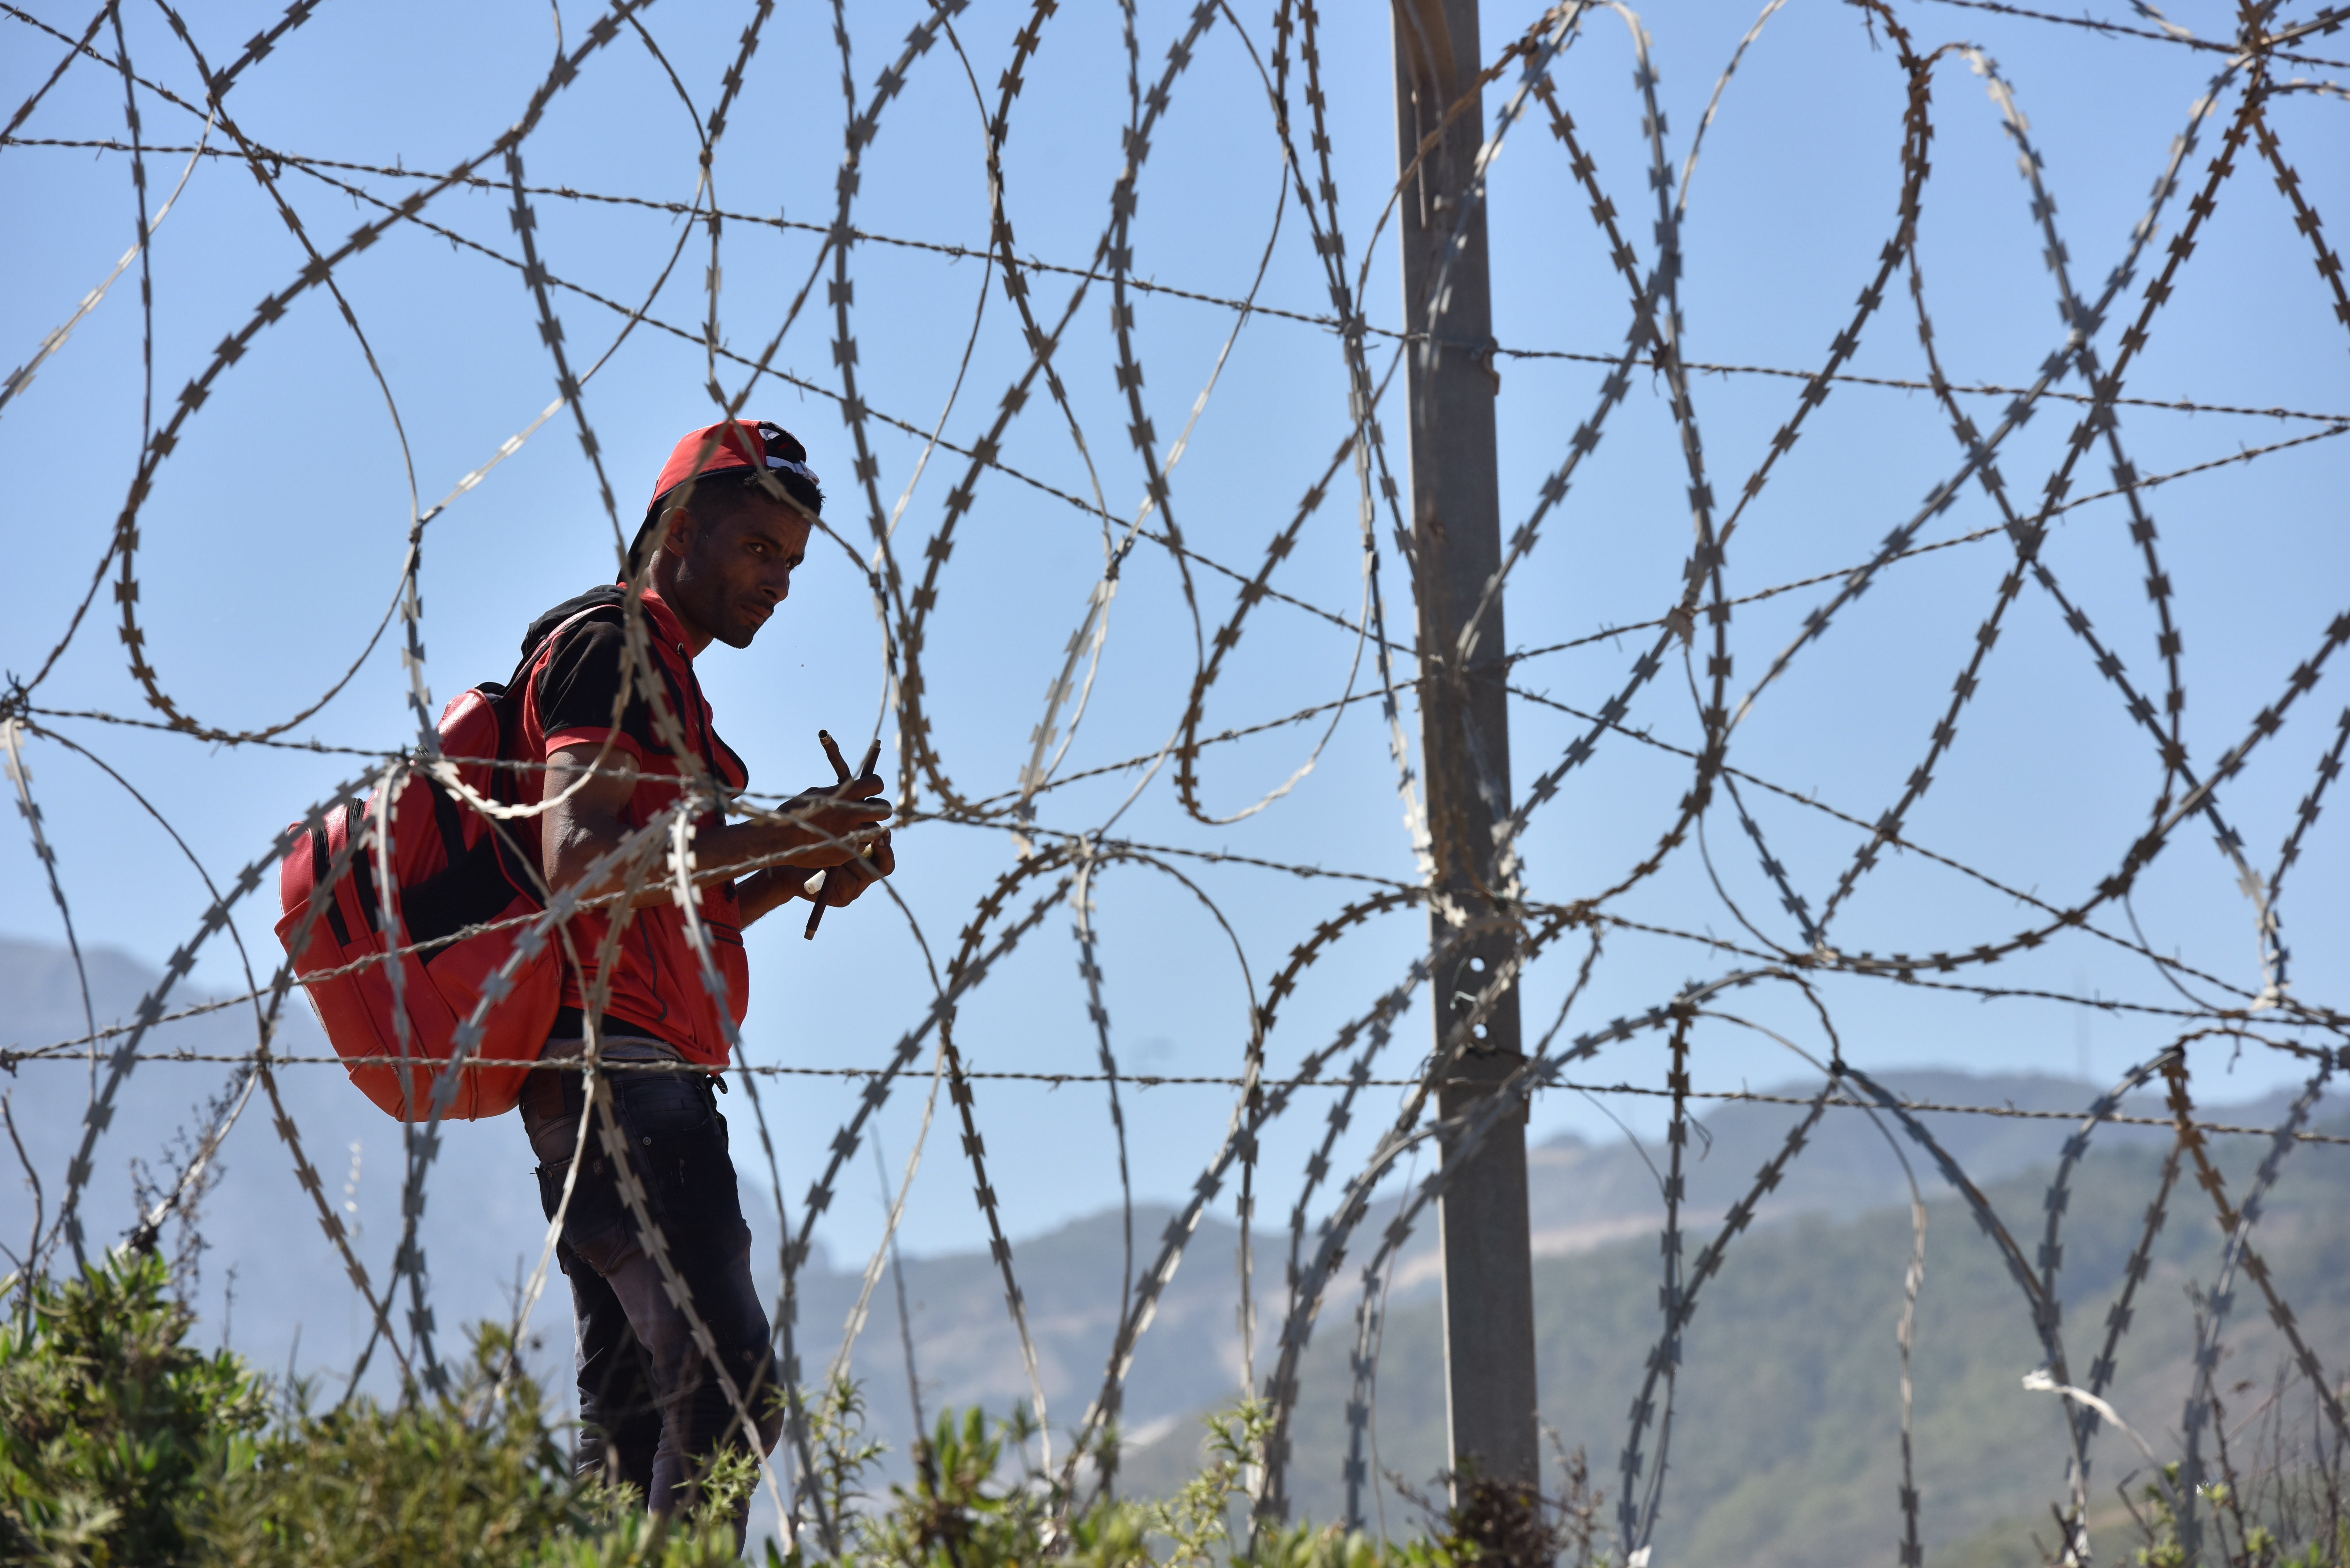 A migrant waits to sneak through the fence in the northern town of Fnideq in an attempt to cross the border from Morocco to the Spanish enclave of Ceuta